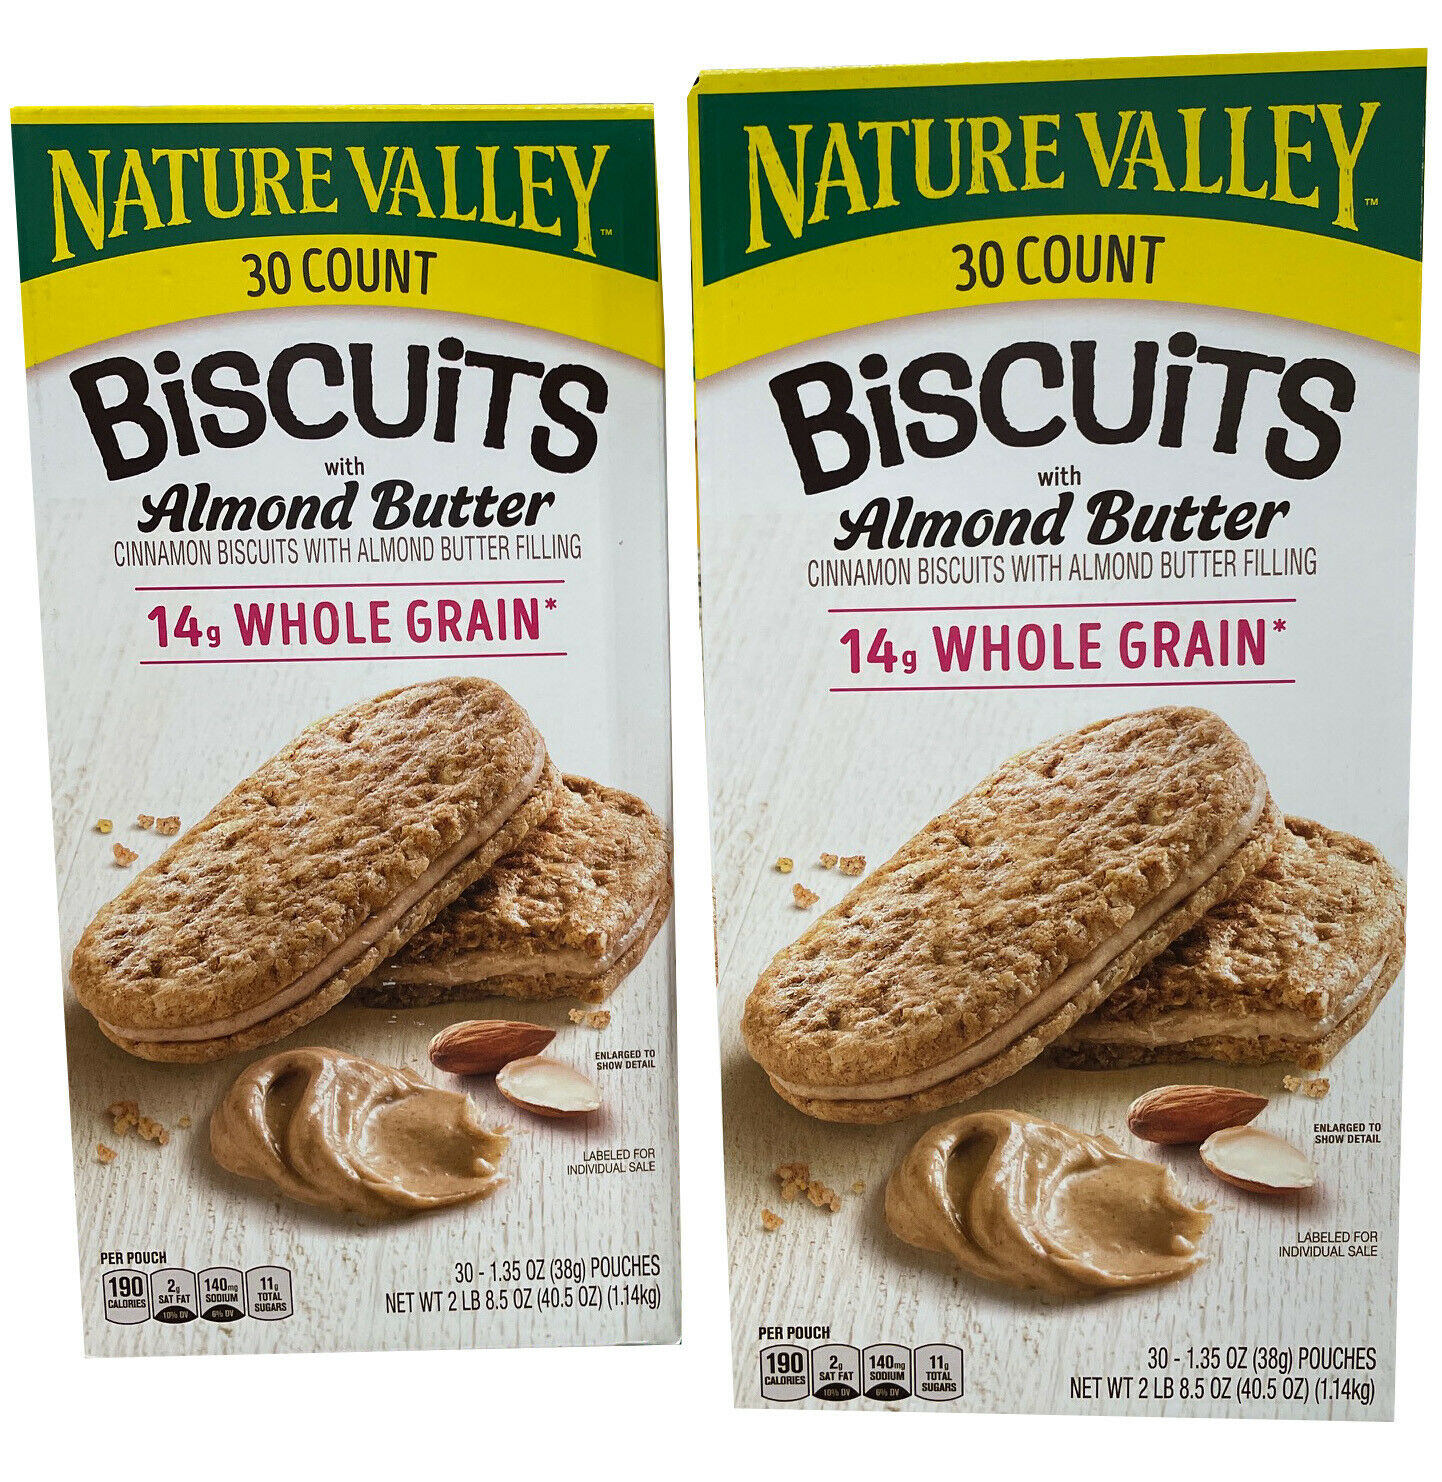 2 Packs Nature Valley Biscuits With Almond Butter 30 Ct 40.5 Oz Oz Each Pack